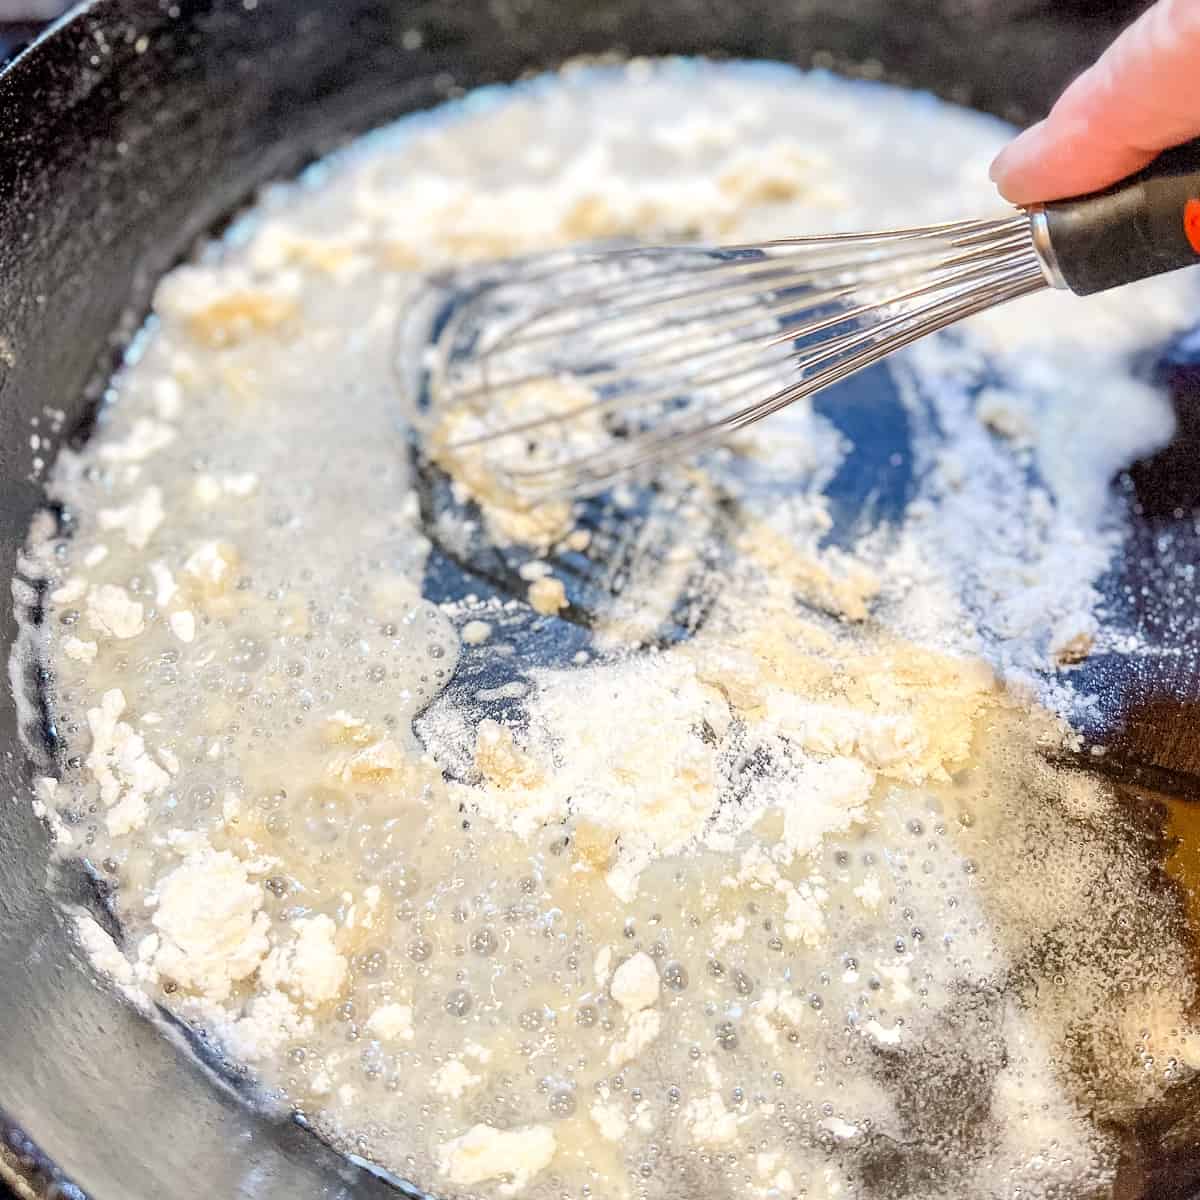 Whisking flour and oil in a cast iron pan.